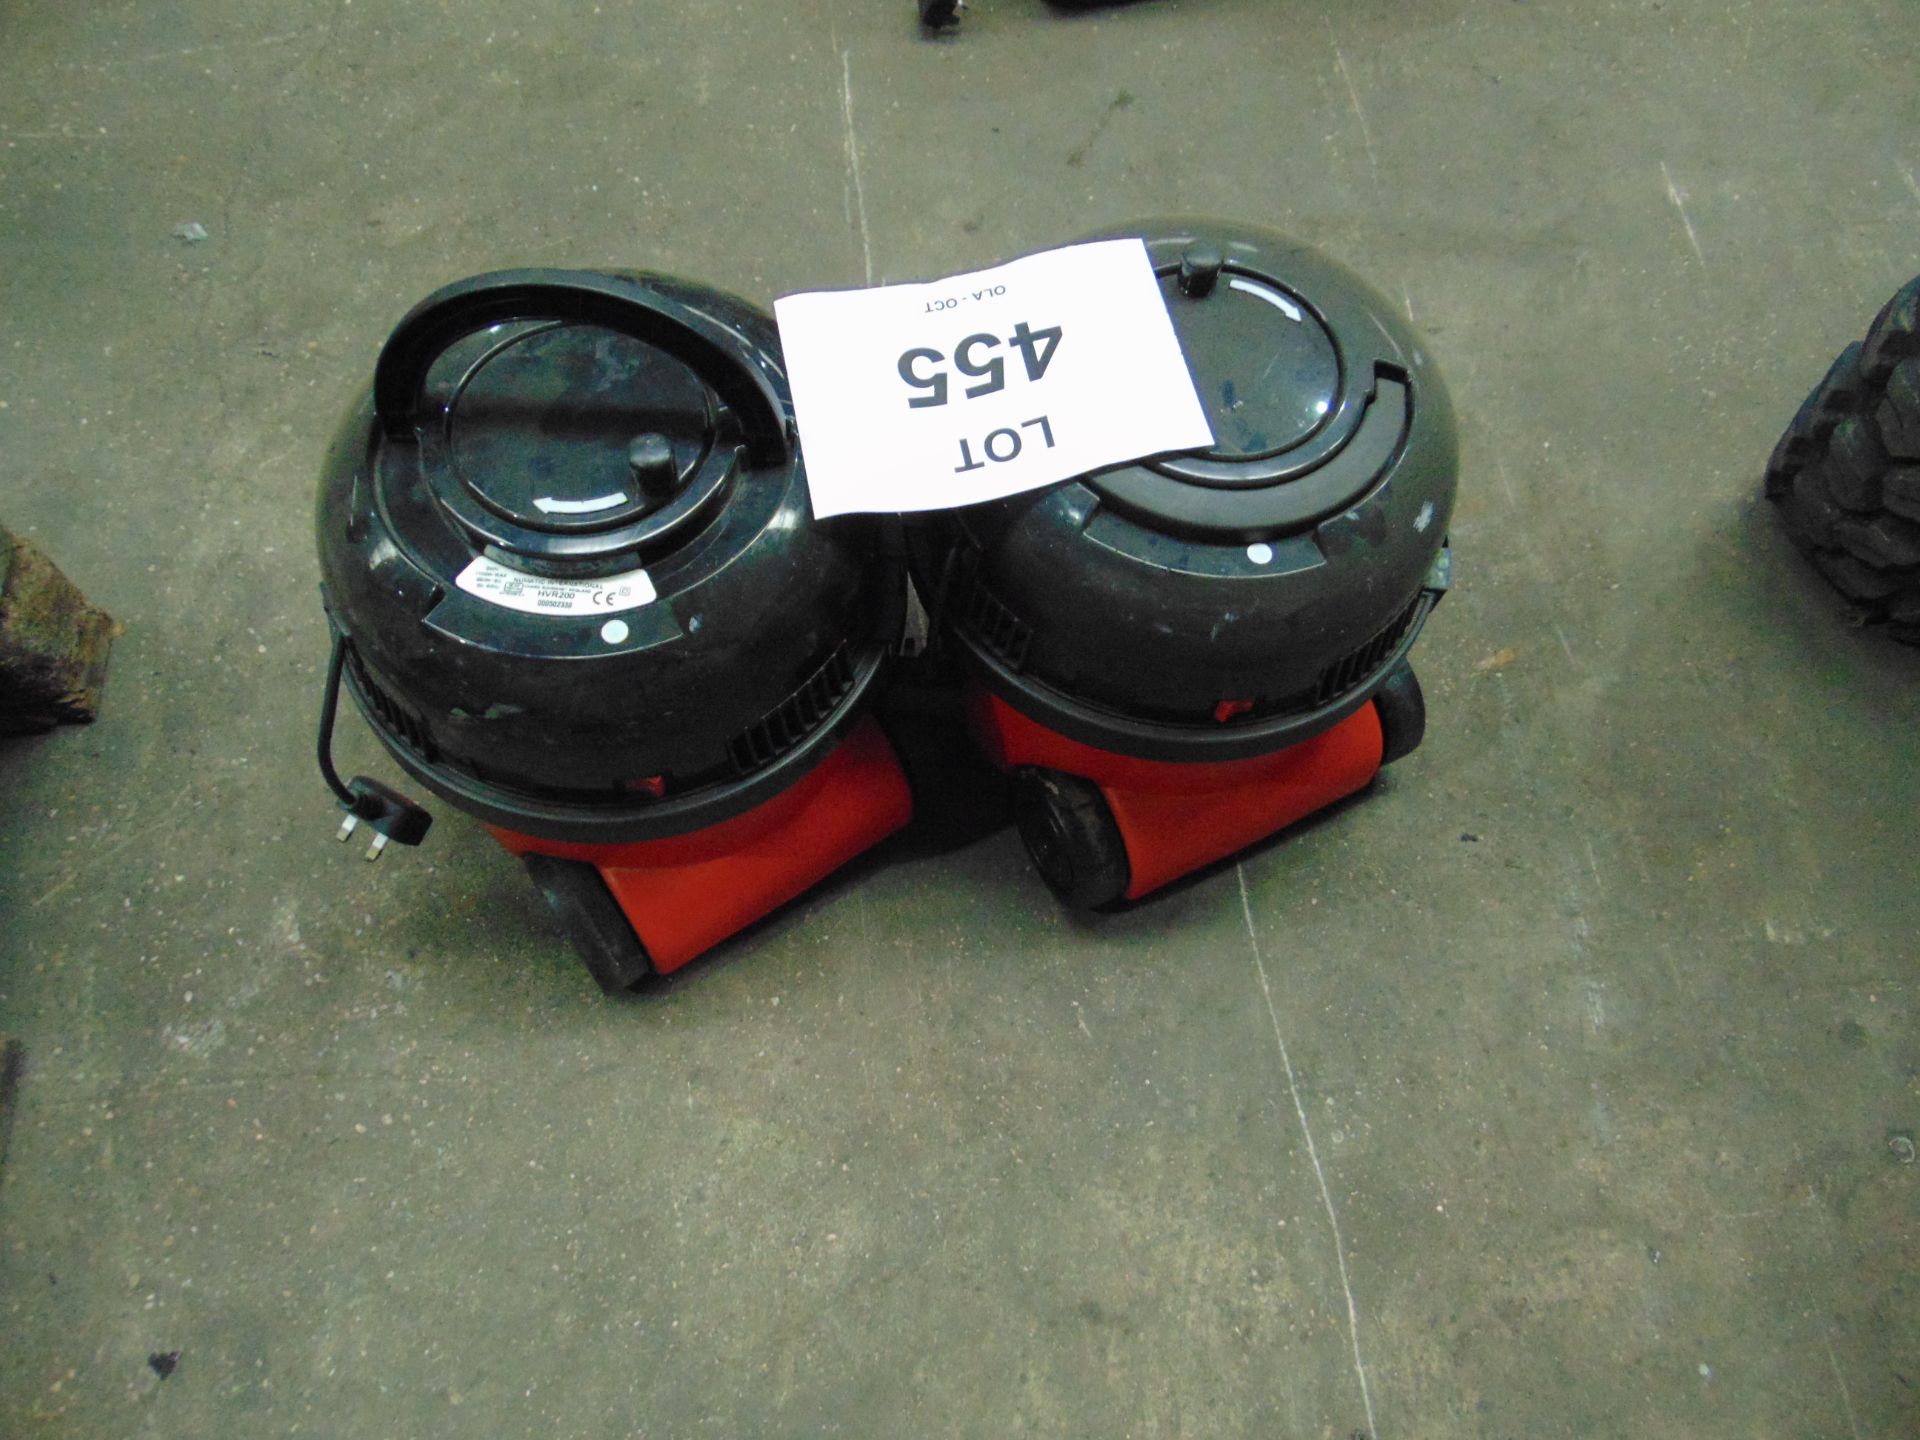 2 x Henry Vacuum Cleaners as Shown - Image 2 of 3